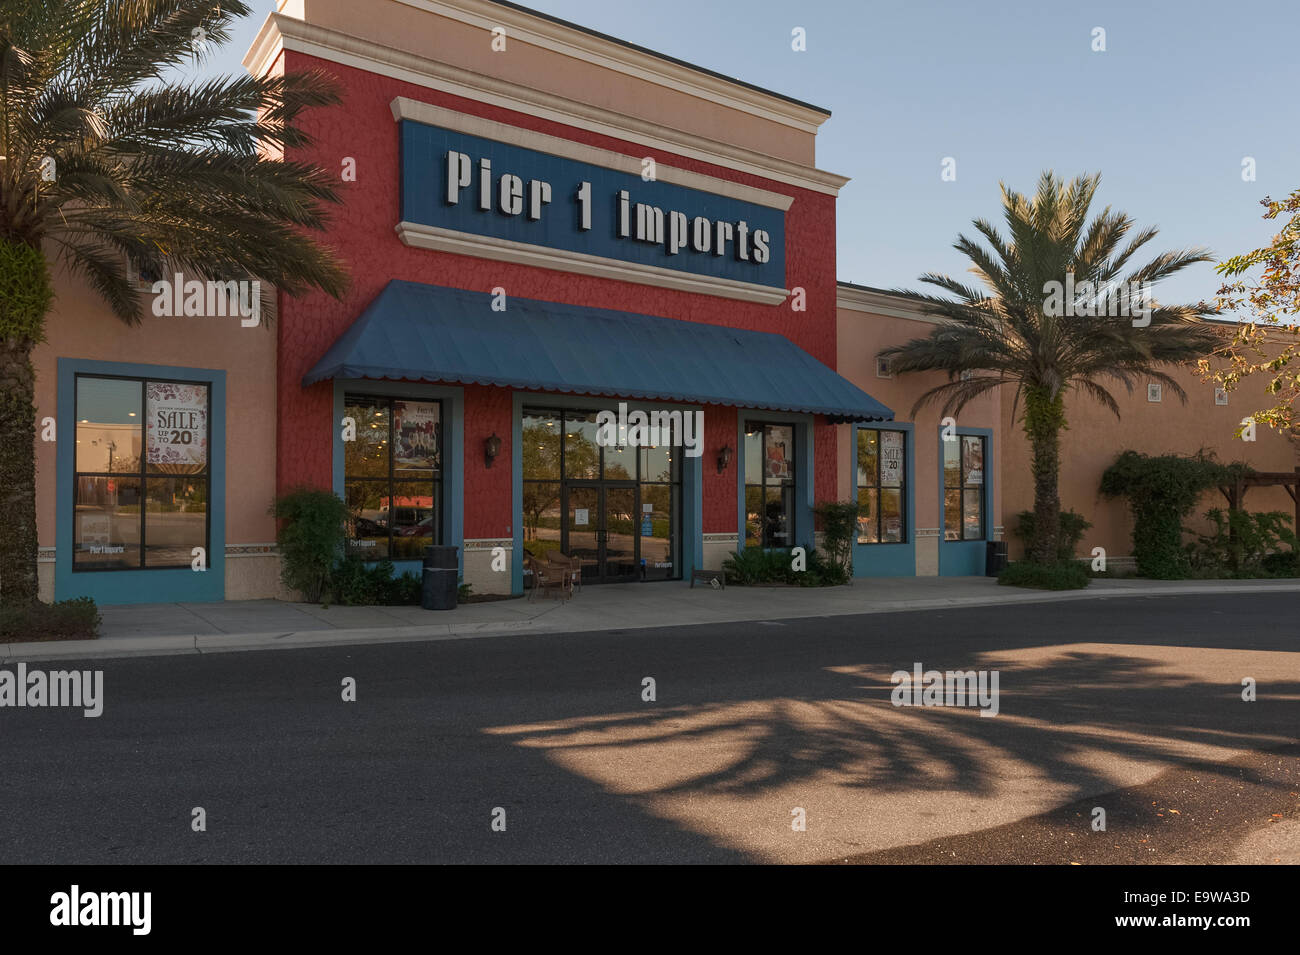 Pier 1 Imports Storefront located in Lady Lake, Florida USA Stock Photo